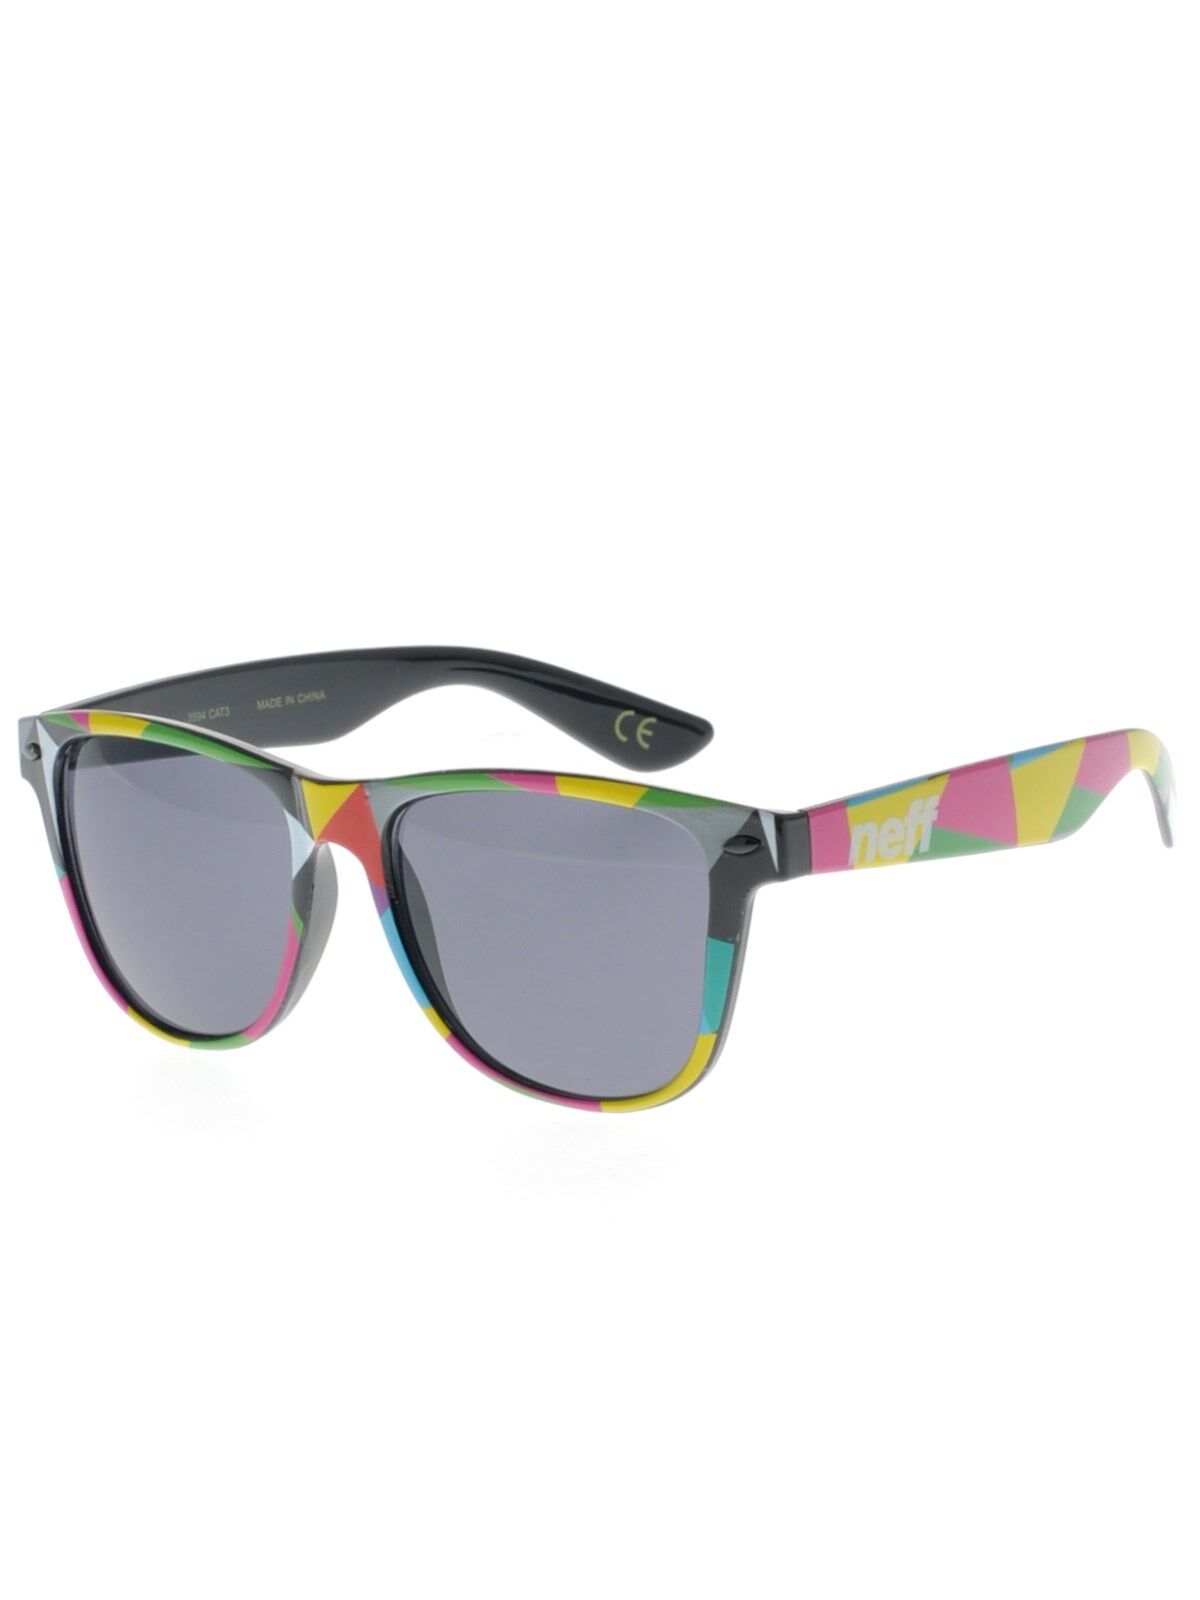 NEFF DAILY SUNGLASSES ABSTRACT One Size